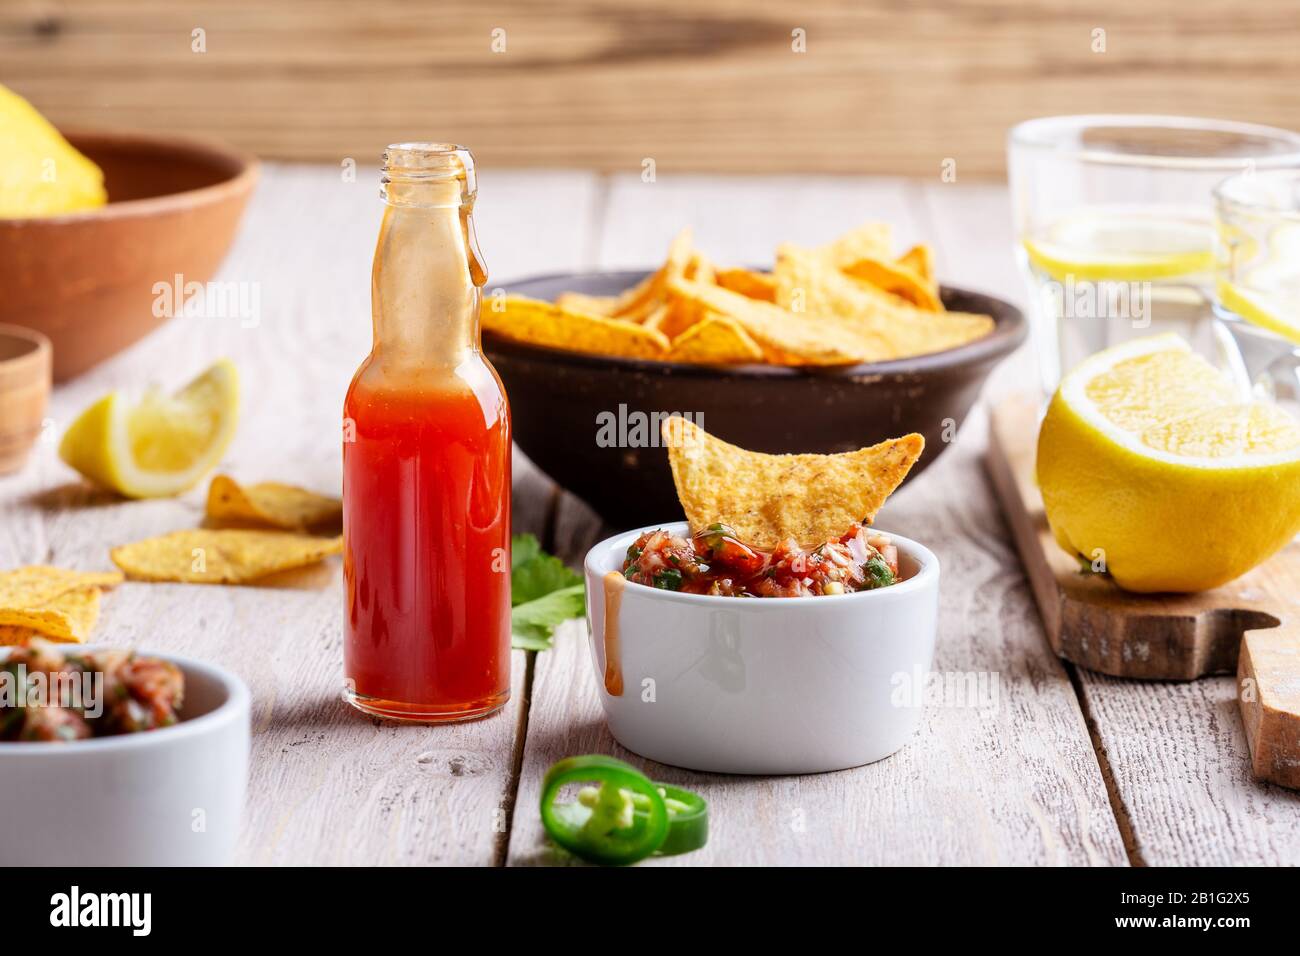 Two bowls full of salsa dip, hot red chili sauce bottle and tortilla chips on rustic wooden table, sause being added to one of the bowls Stock Photo